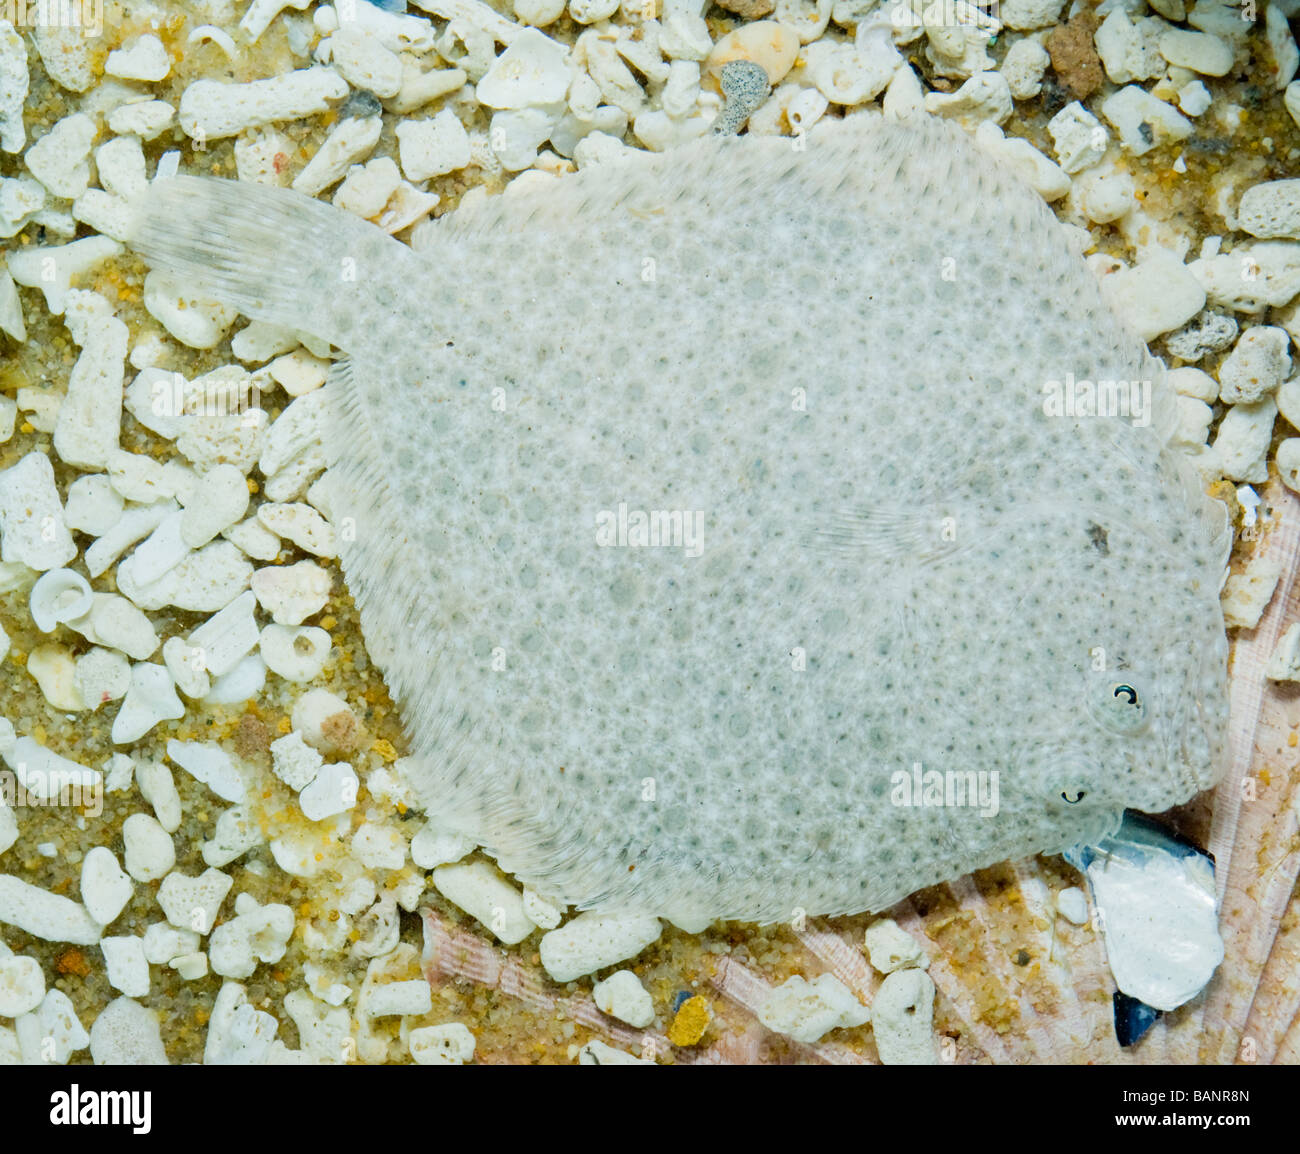 Turbot, Psetta maxima, concealed on the sea floor in shallow water. Stock Photo